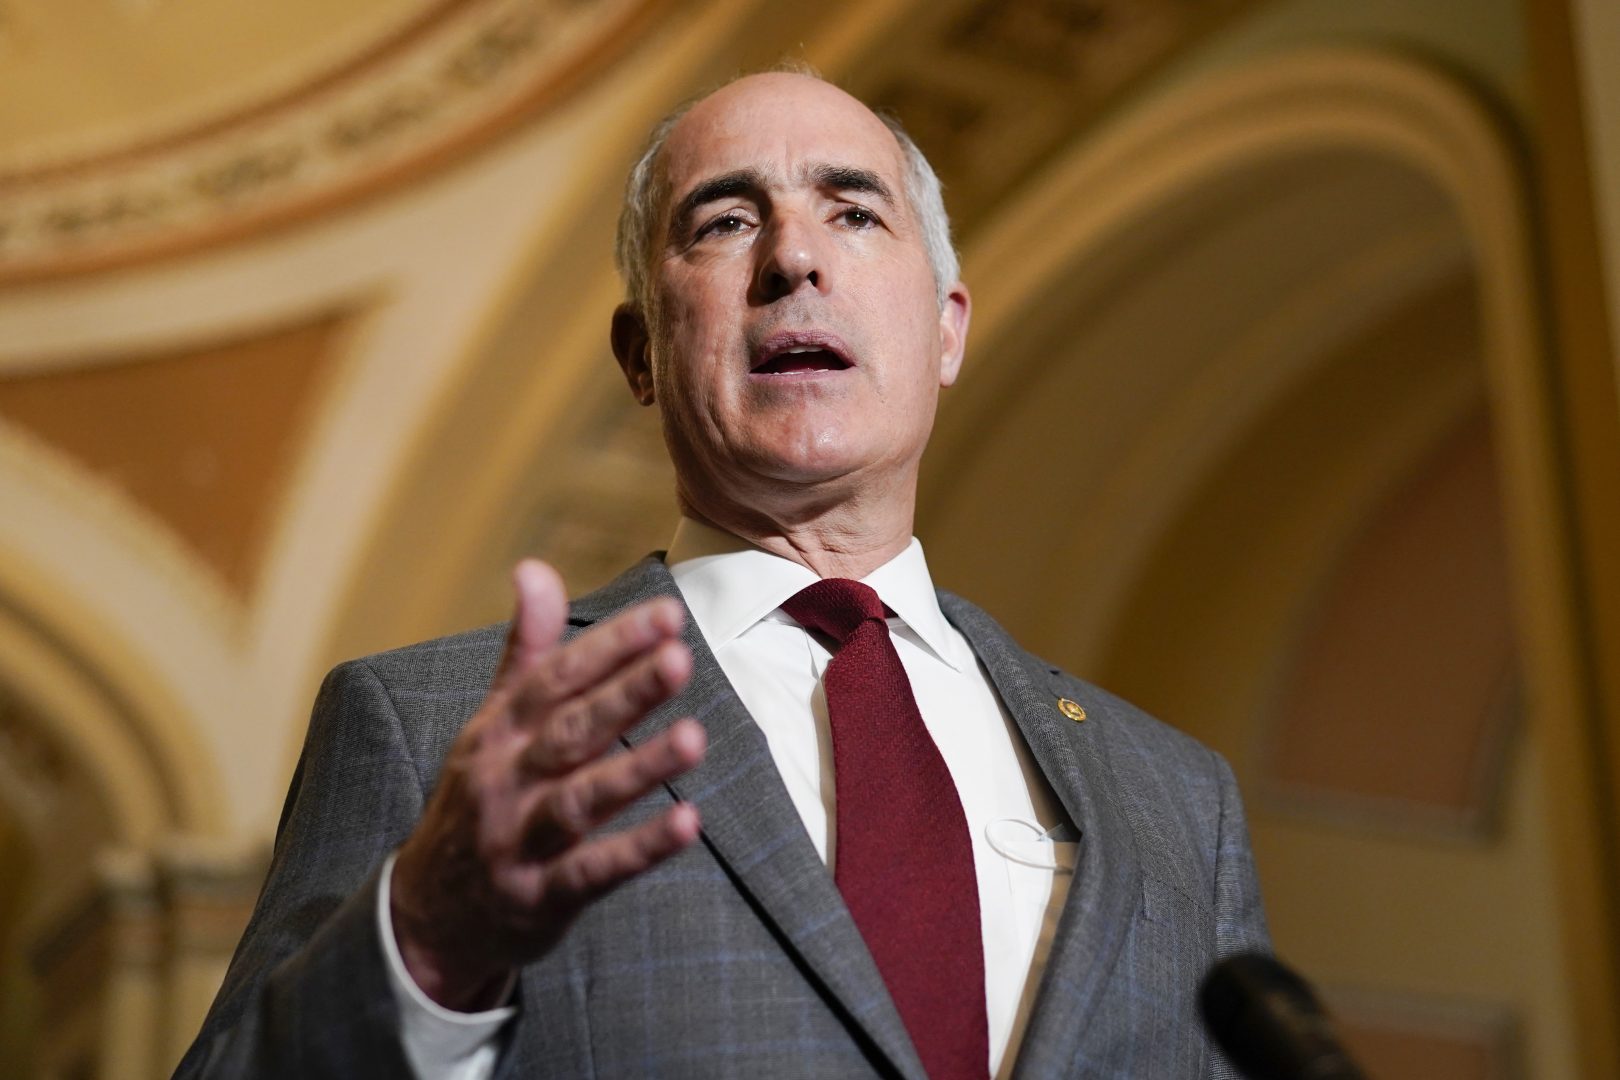 Sen. Bob Casey, D-Pa., speaks during a news conference on Capitol Hill in Washington, on Dec. 7, 2021.  